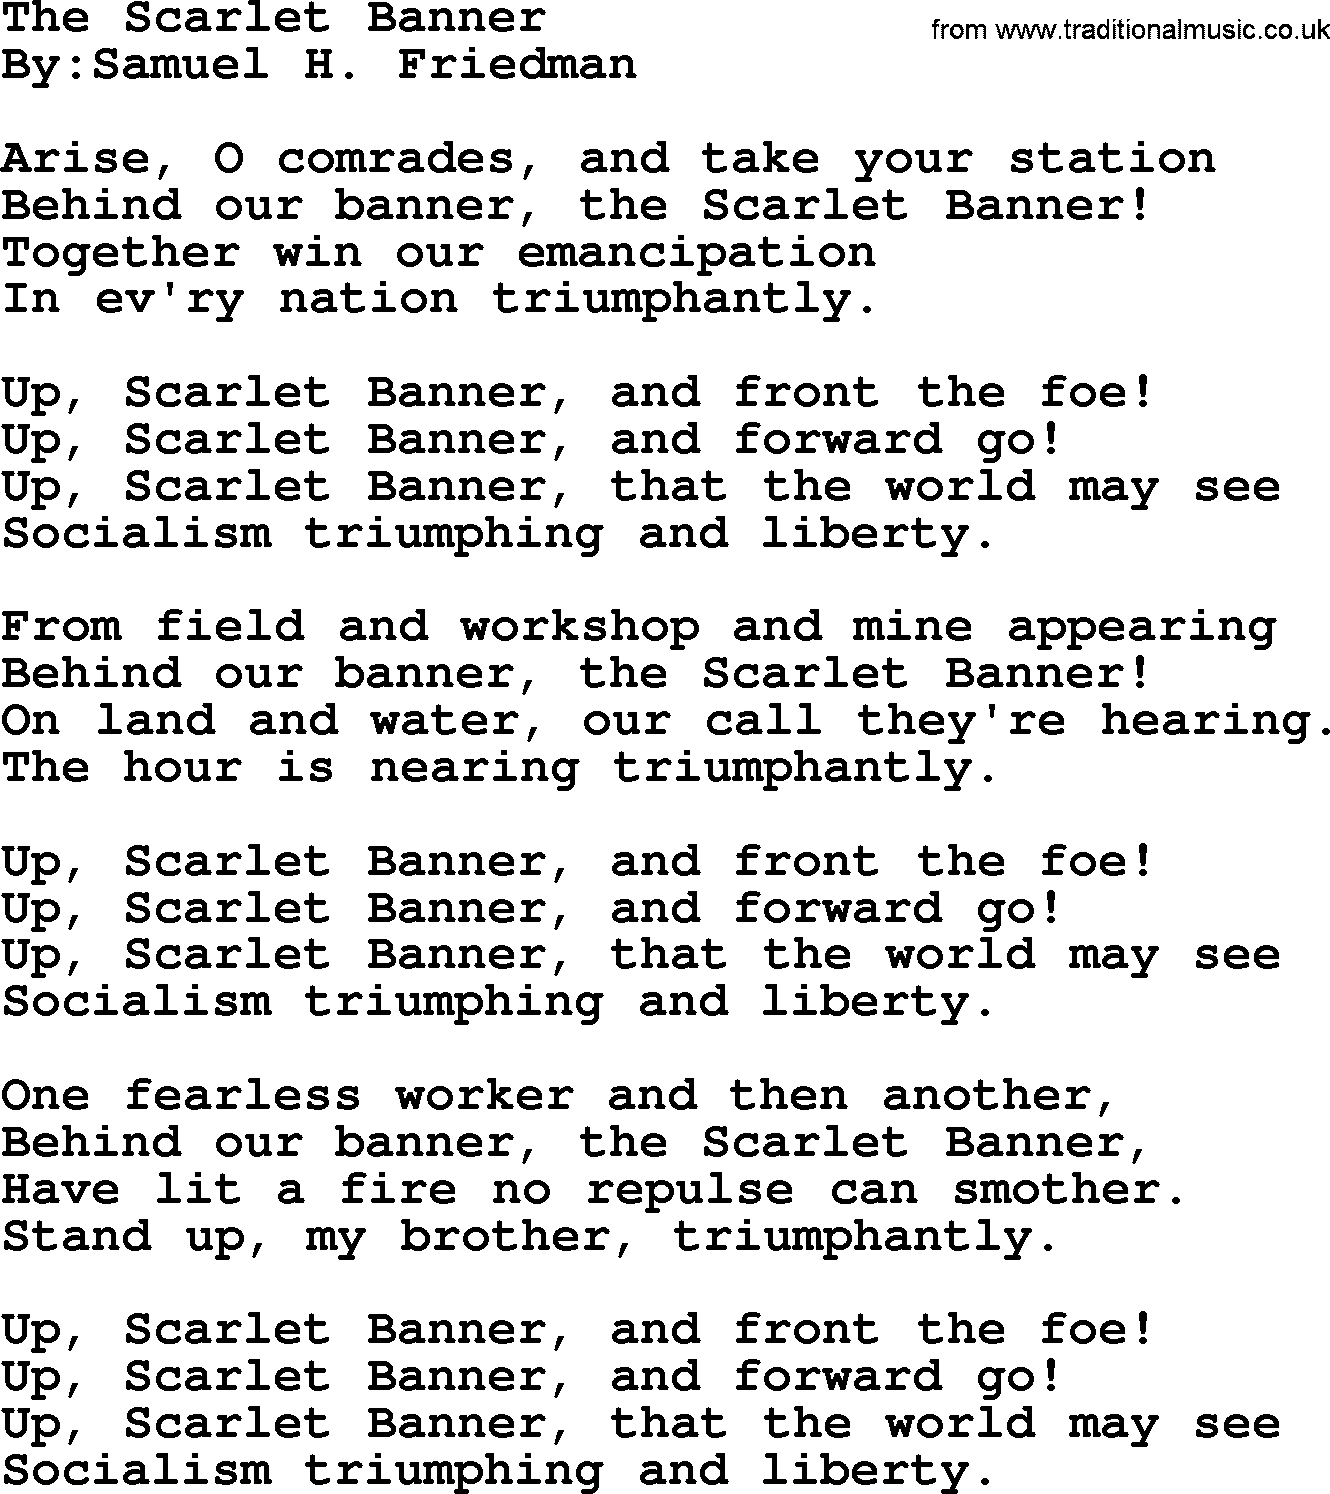 Political, Solidarity, Workers or Union song: The Scarlet Banner, lyrics